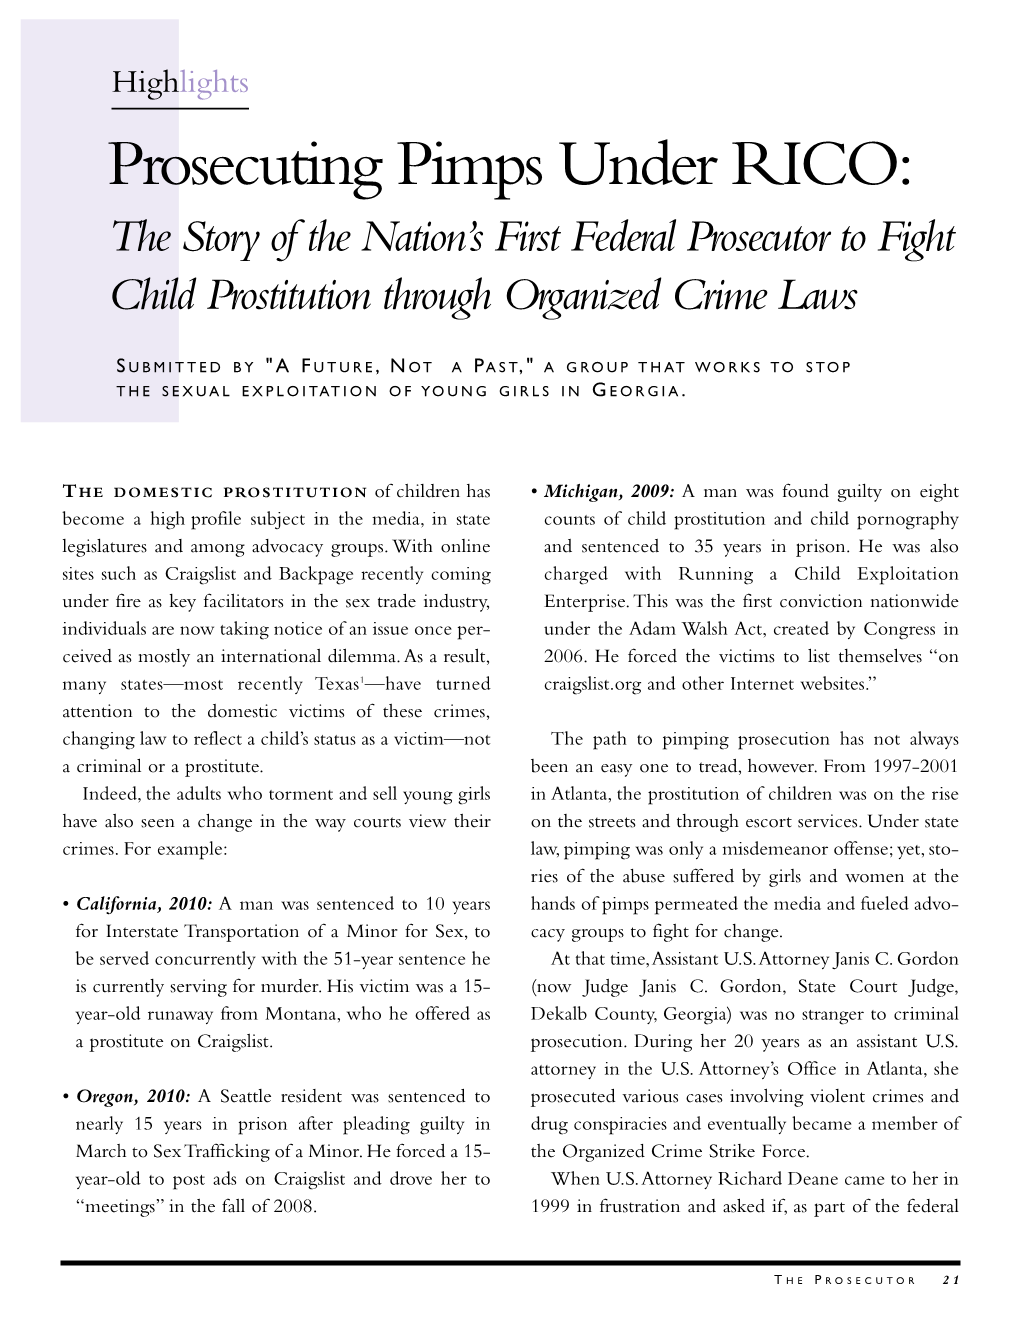 Prosecuting Pimps Under RICO: the Story of the Nation’S First Federal Prosecutor to Fight Child Prostitution Through Organized Crime Laws